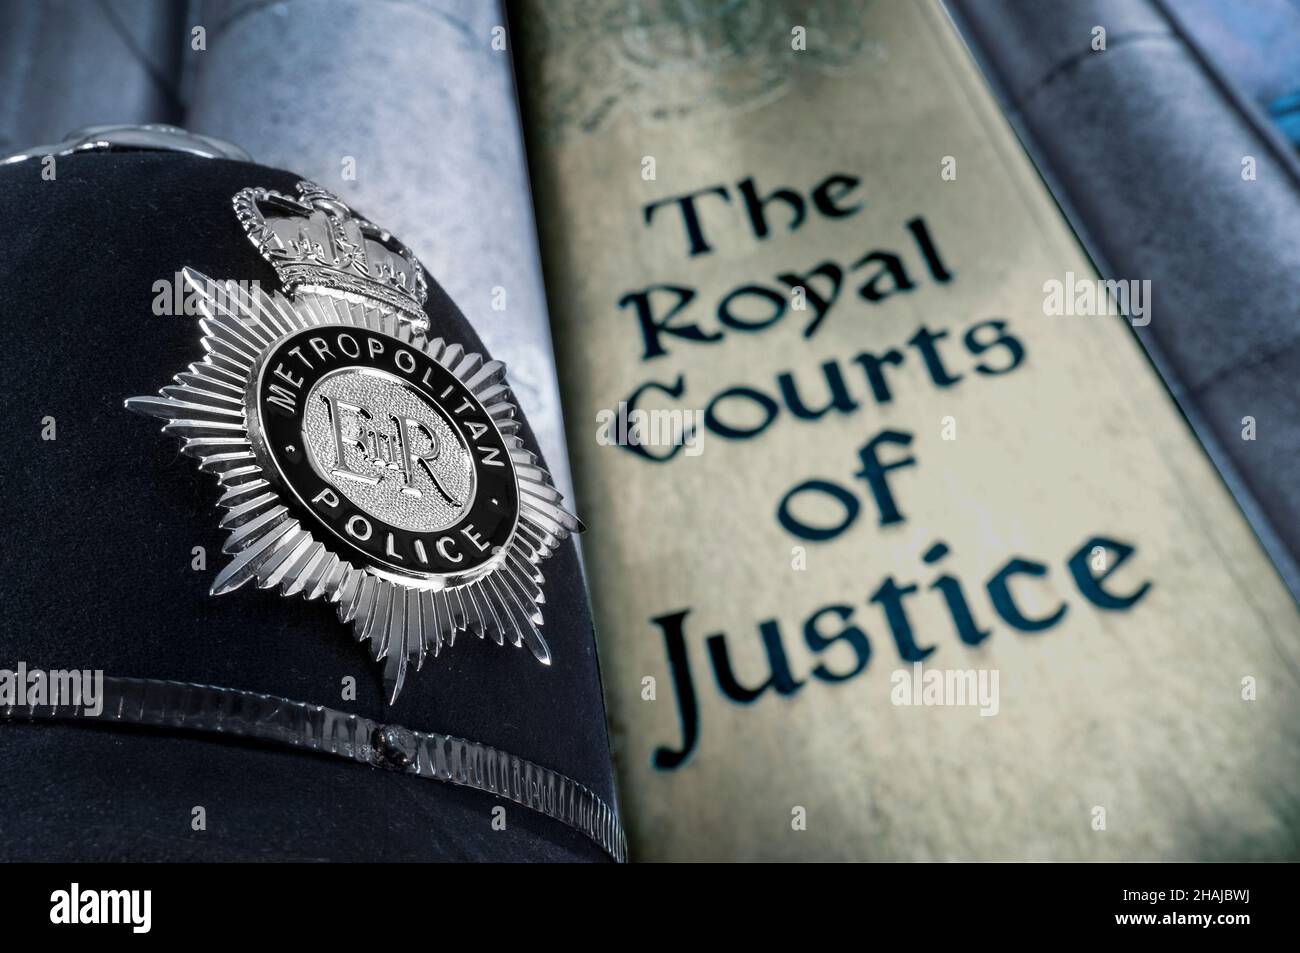 ROYAL COURTS OF JUSTICE POLICE HELMET BADGE LAW Metropolitan London Policeman, upholding The Law concept with Police helmet badge and entrance sign to Royal Courts of Justice Holborn London UK Stock Photo